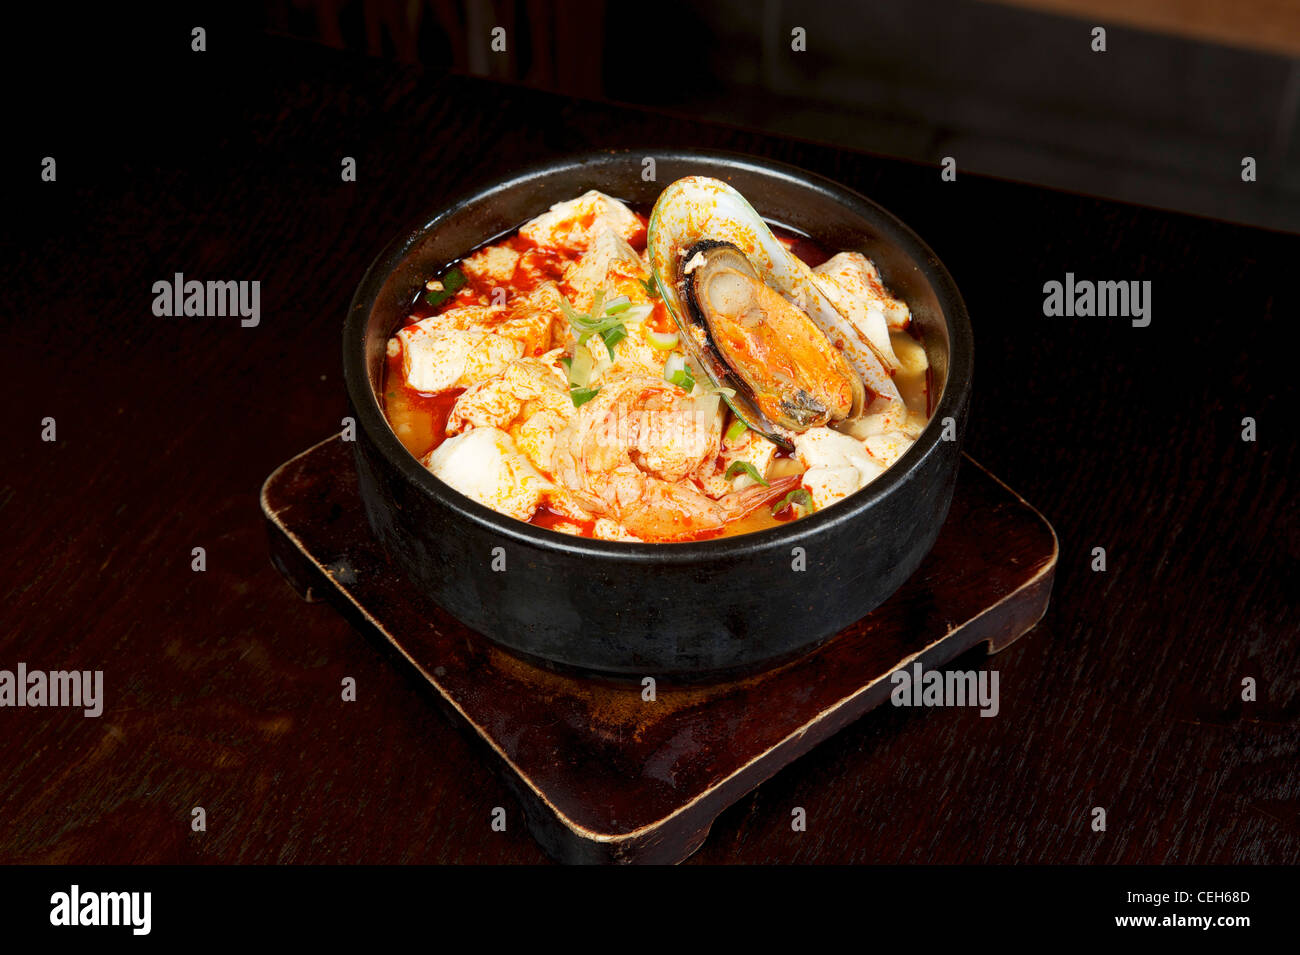 Korean Kim chi (kimchi) with mussels Stock Photo